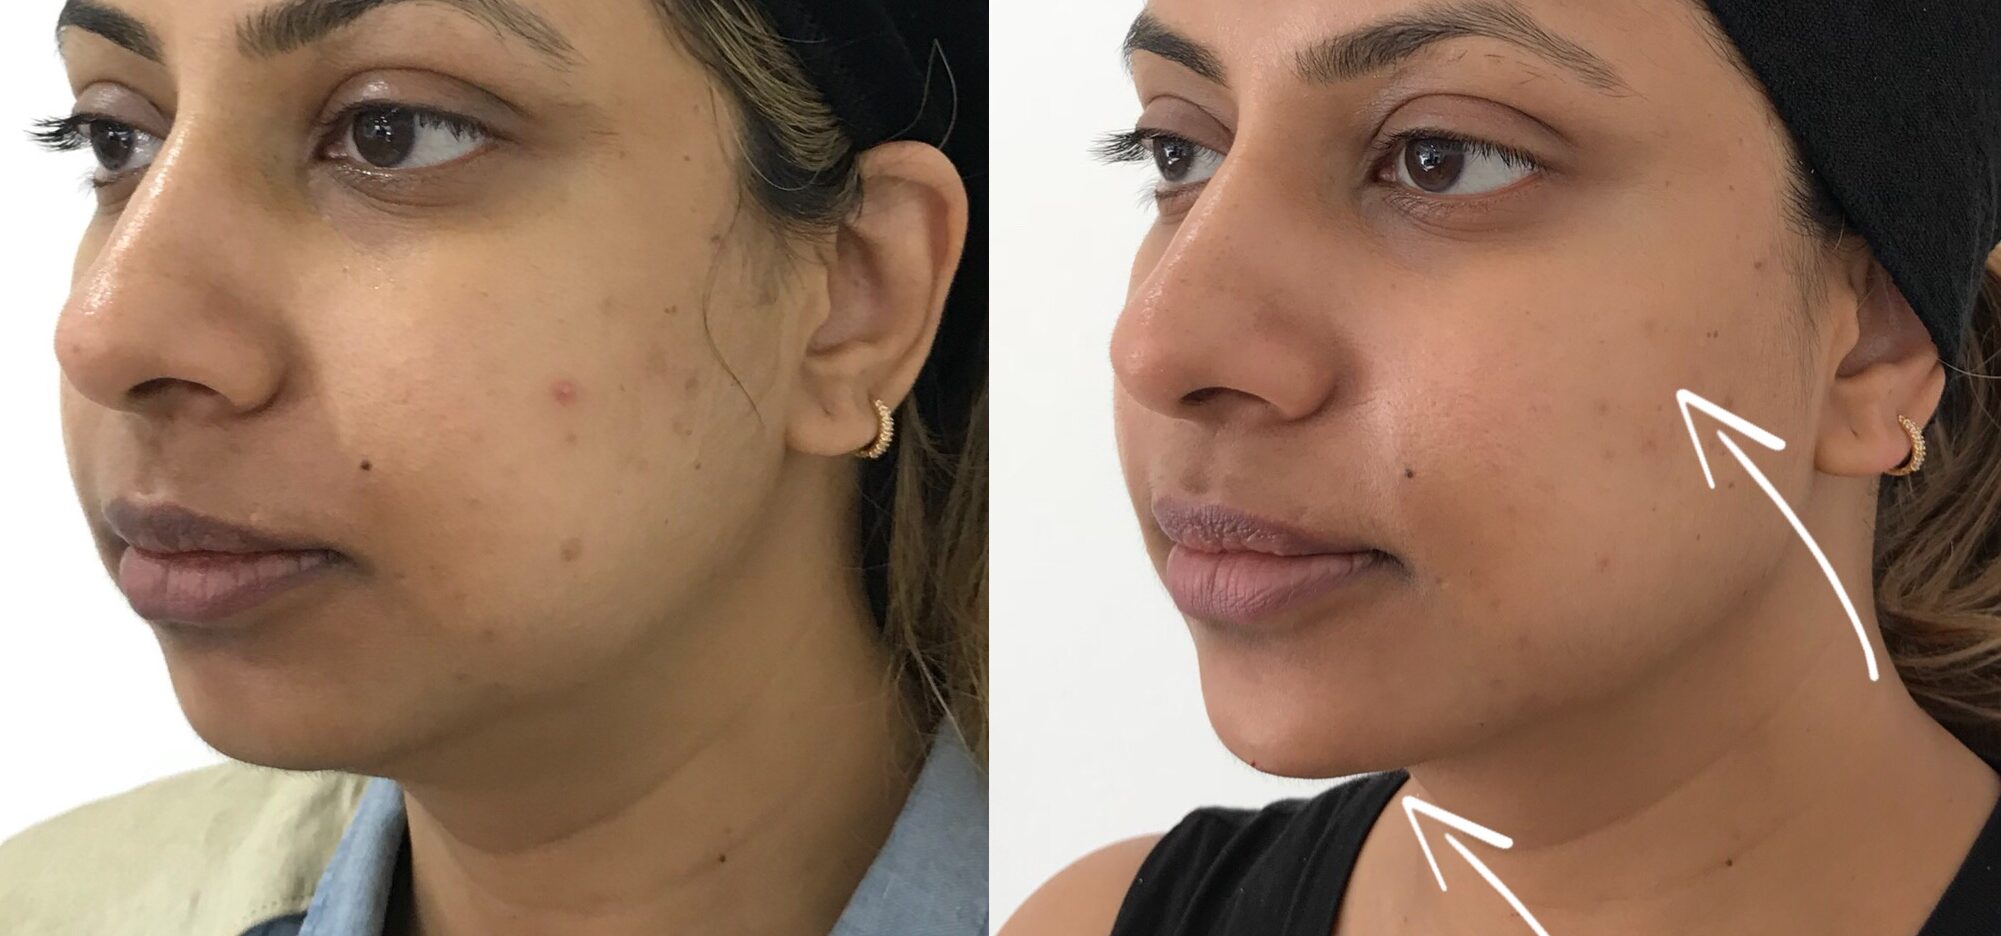 Before and after images showing the impact of 1ml jawline filler on each side